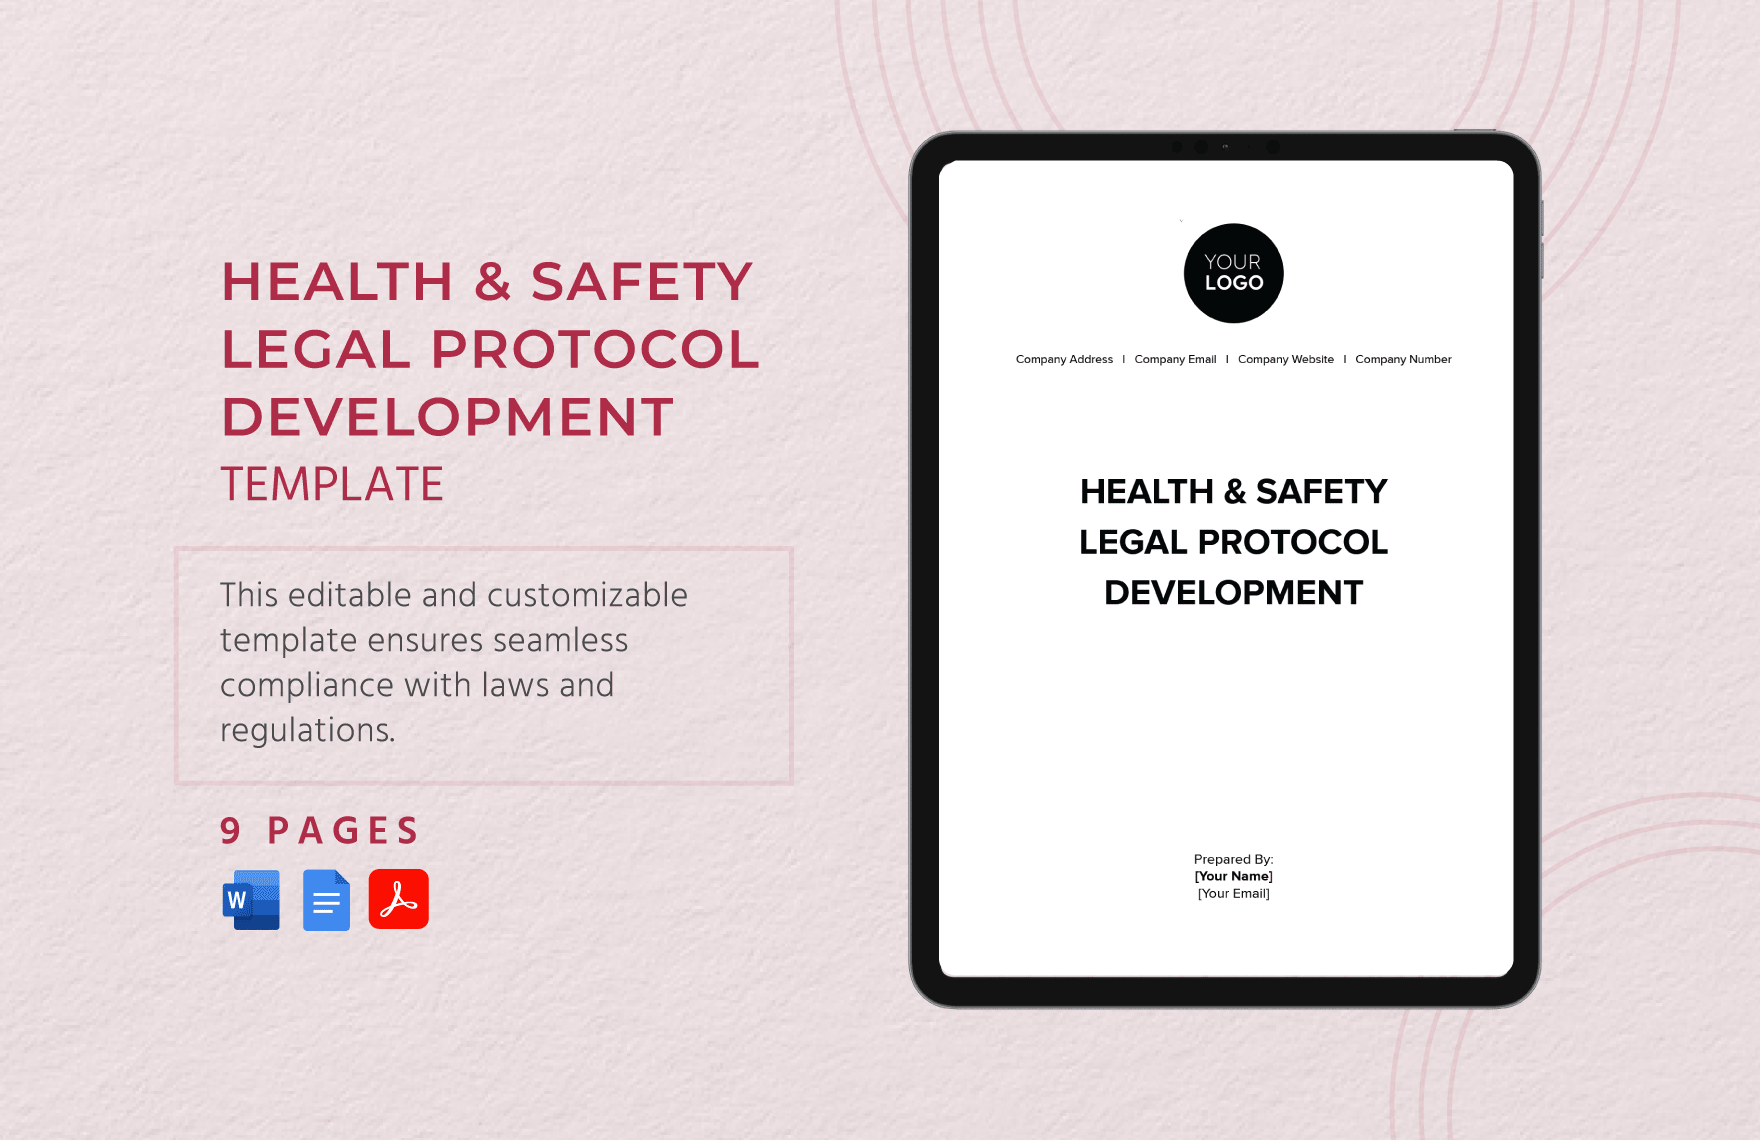 Health & Safety Legal Protocol Development Template